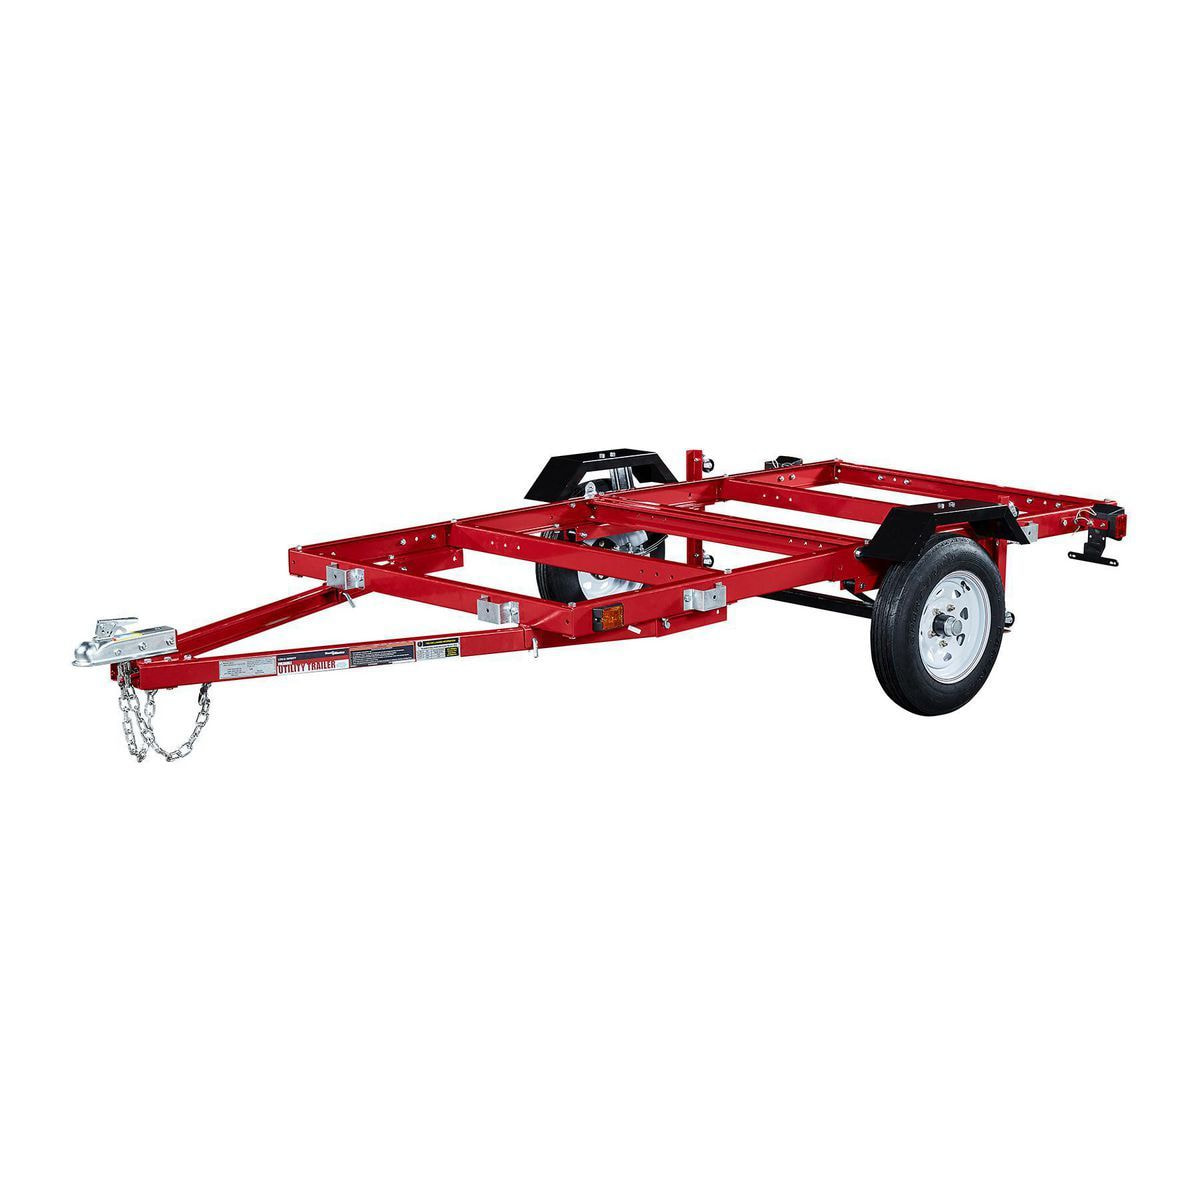 What You Need When Buying a Trailer？